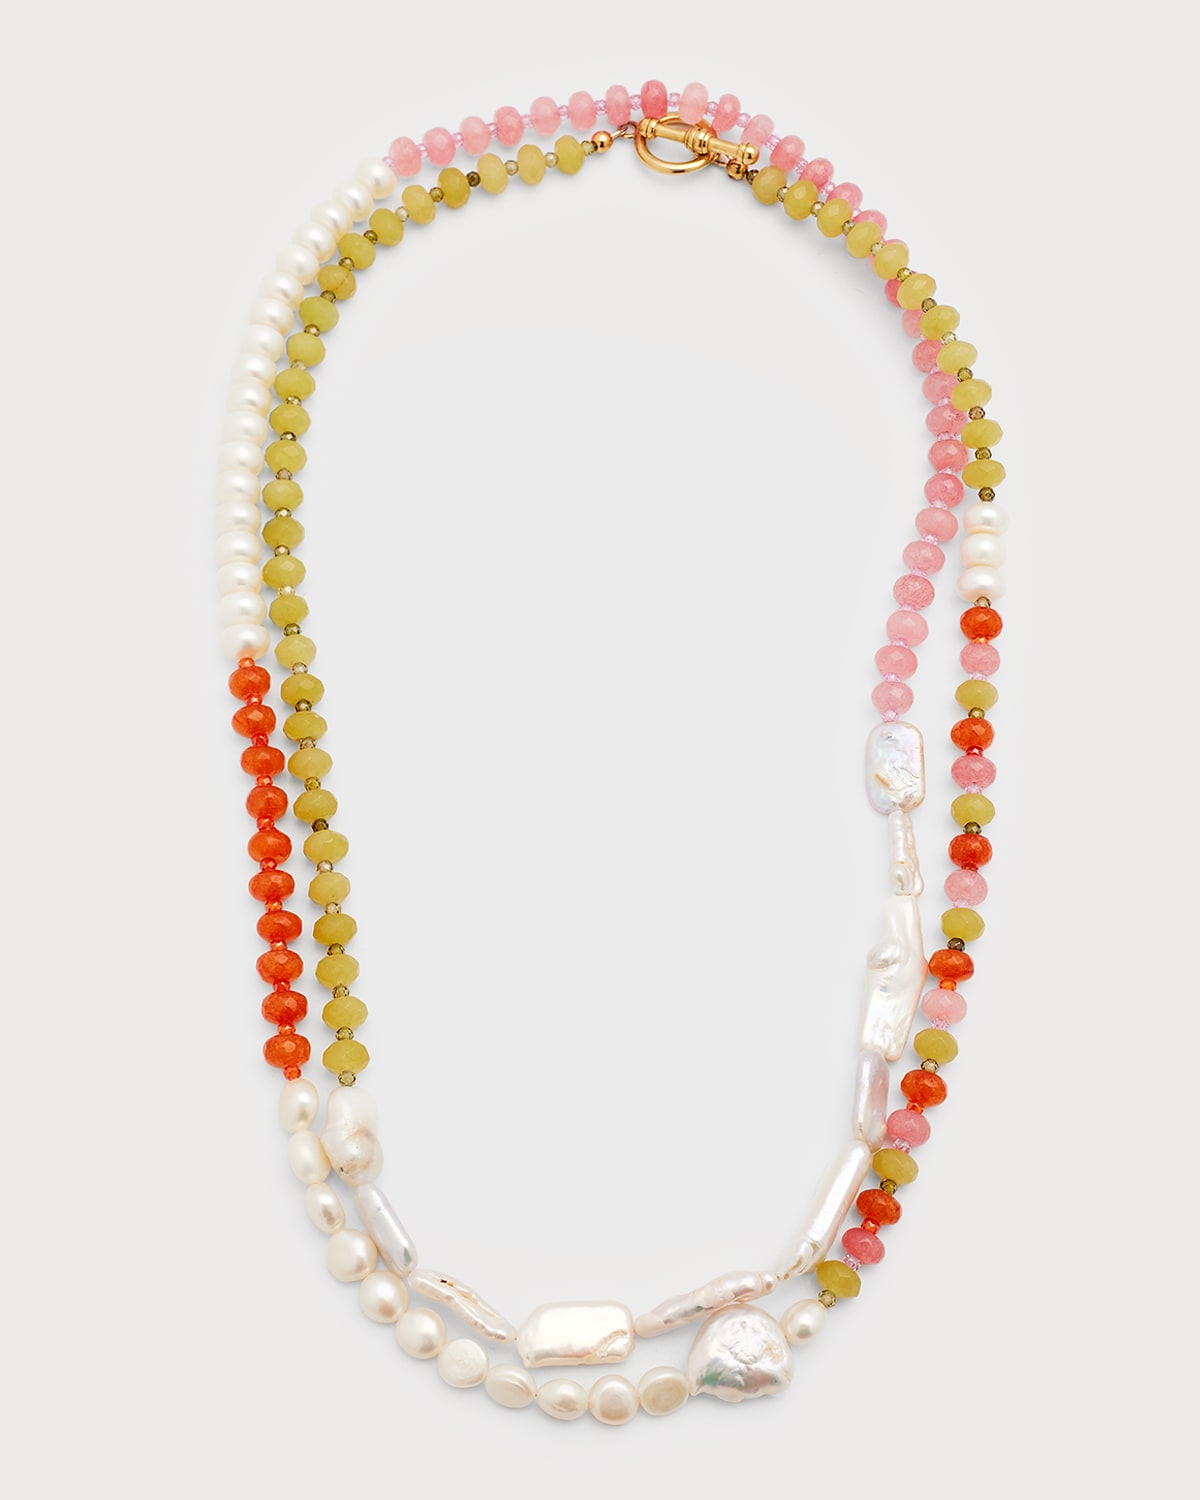 Rhinebeck Crystal Bead & Pearl Necklace